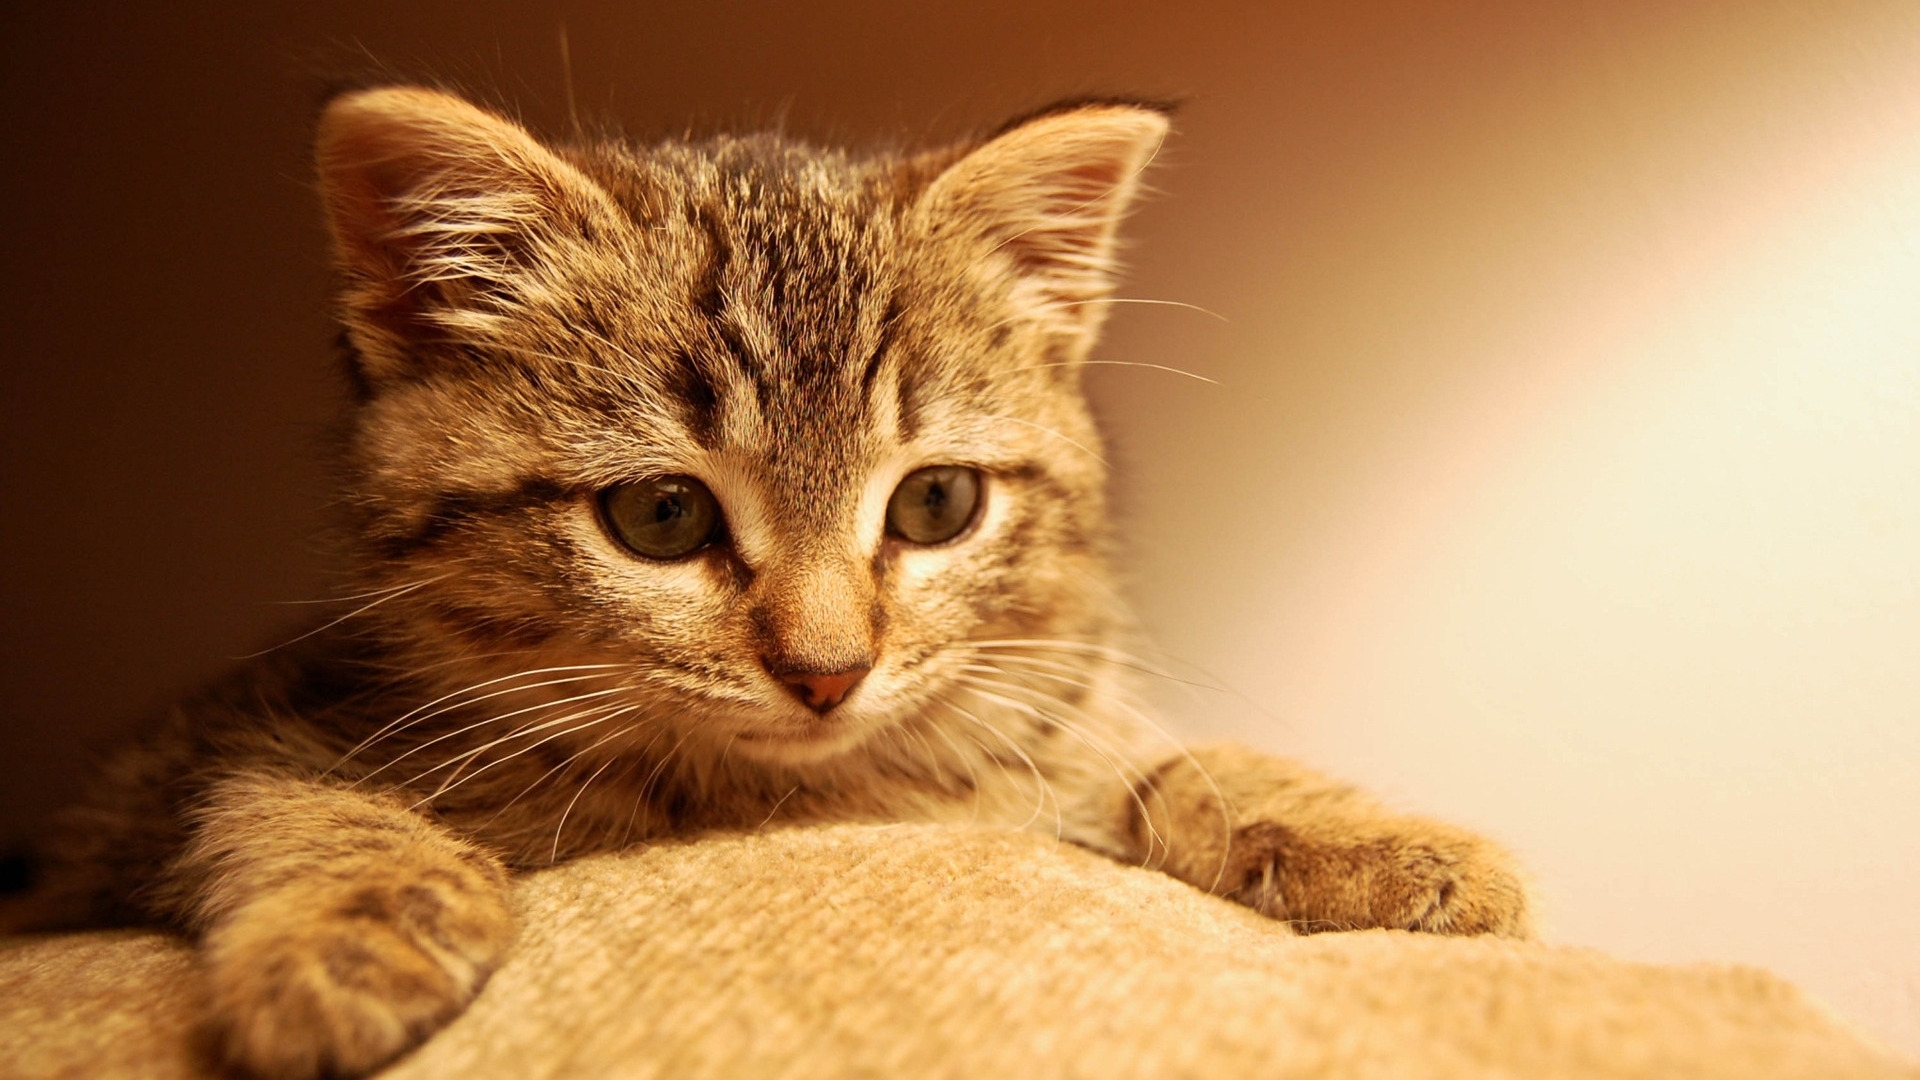 Cool Wallpapers cats, animals, orange